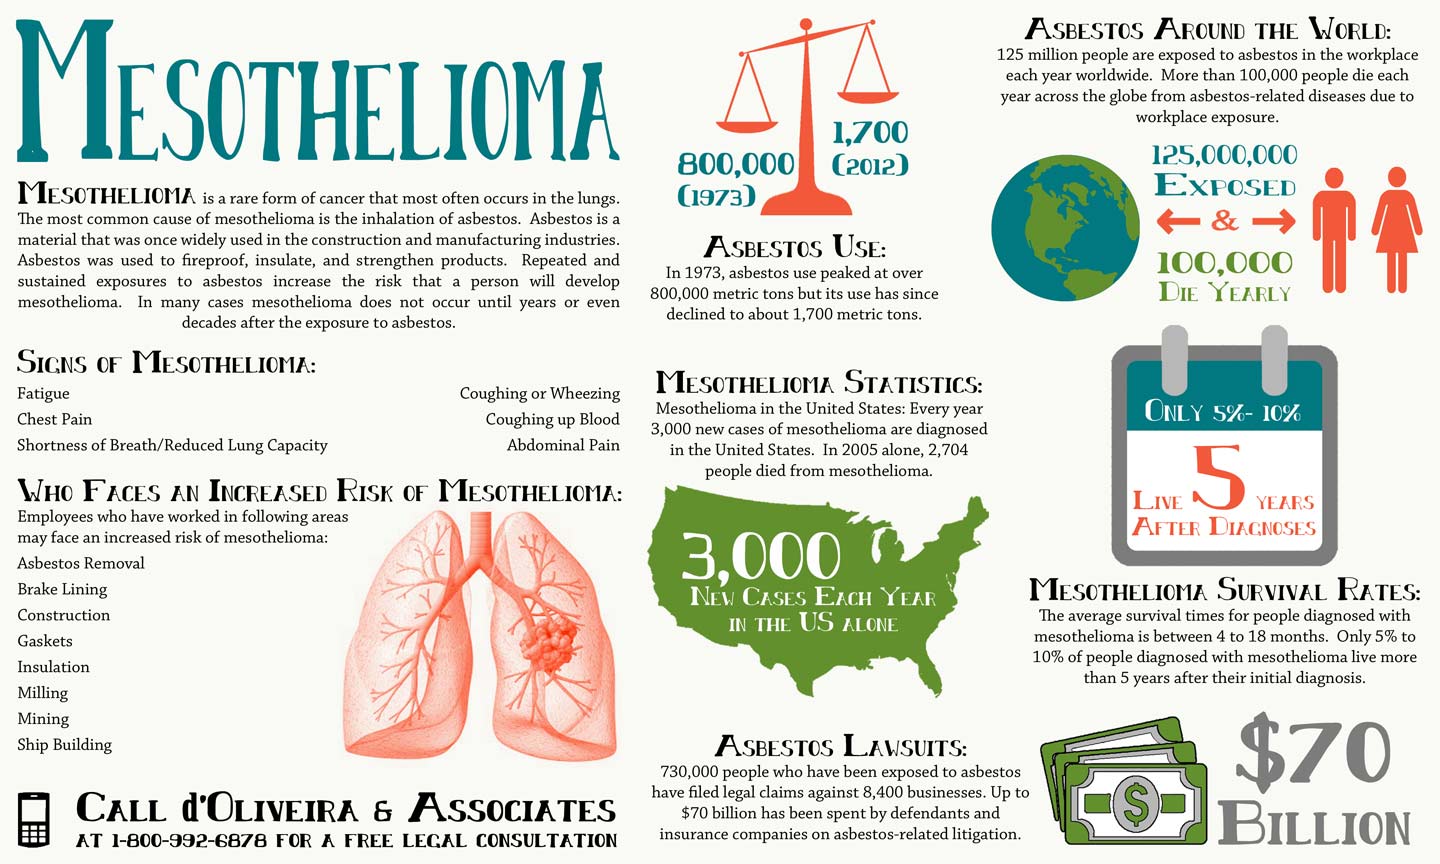 Mesothelioma Lawsuits from Asbestos Exposure Infographic